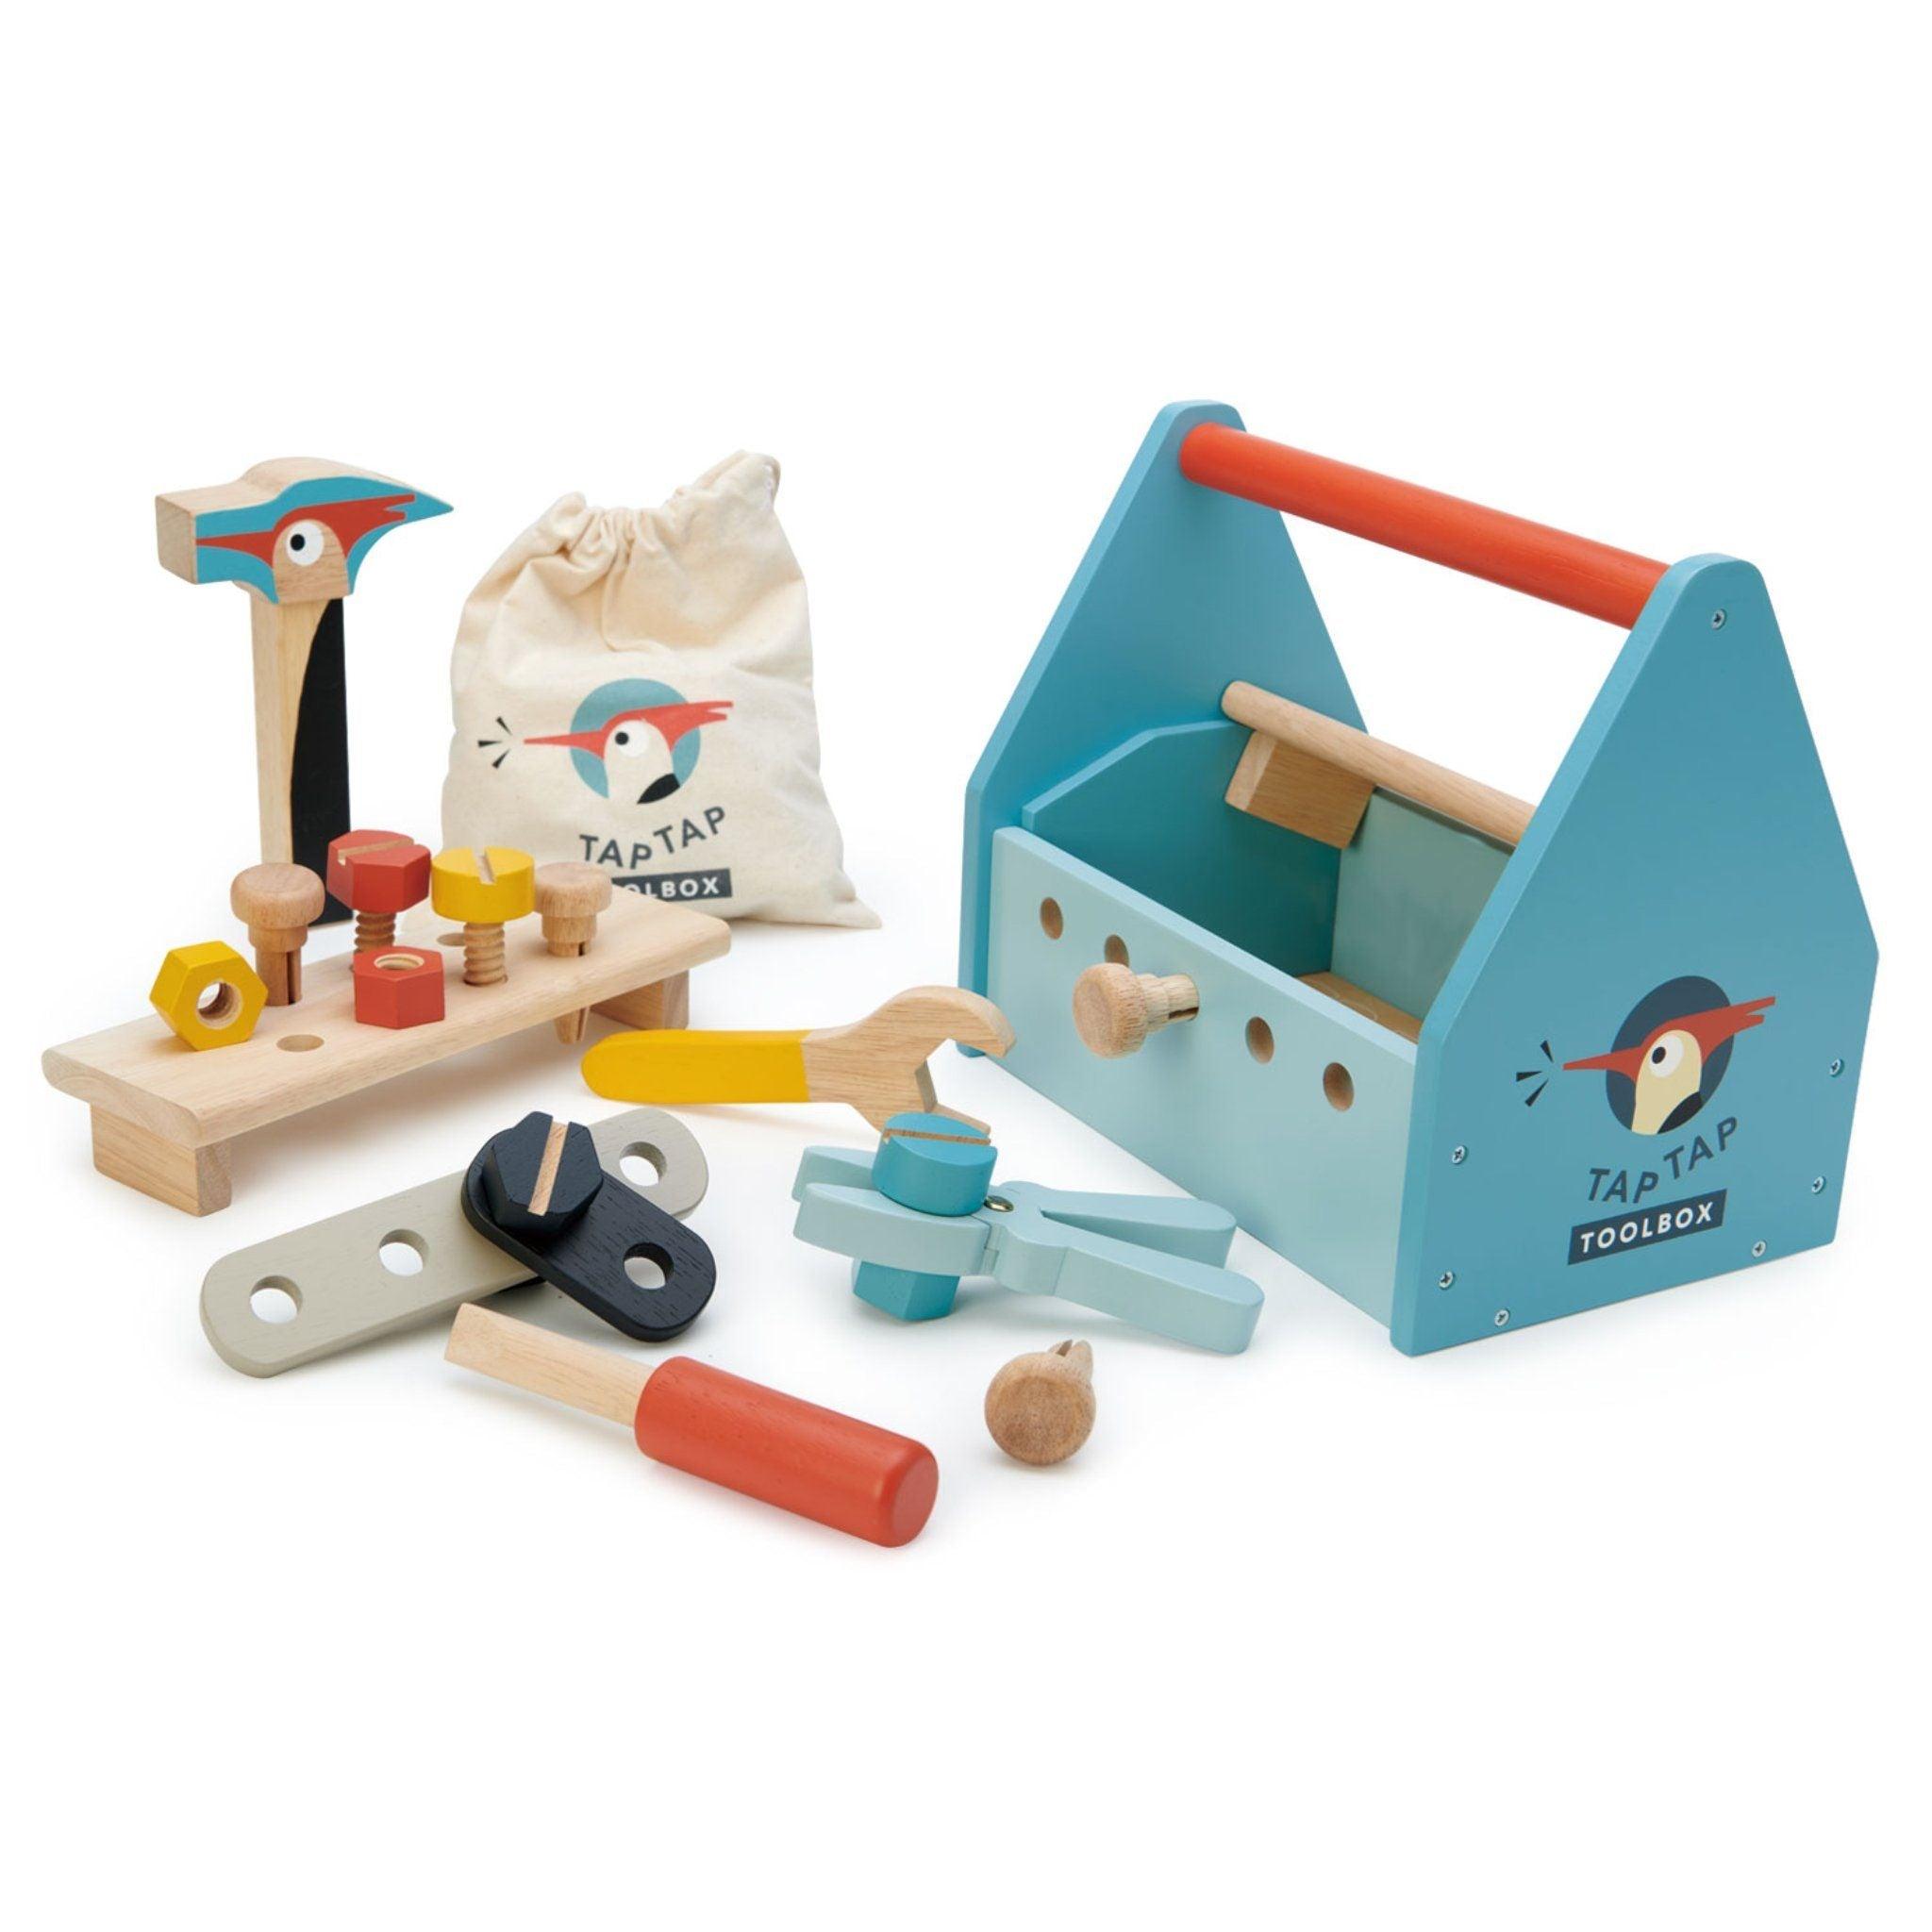 Tender Leaf Toys: wooden Tap Tool Box